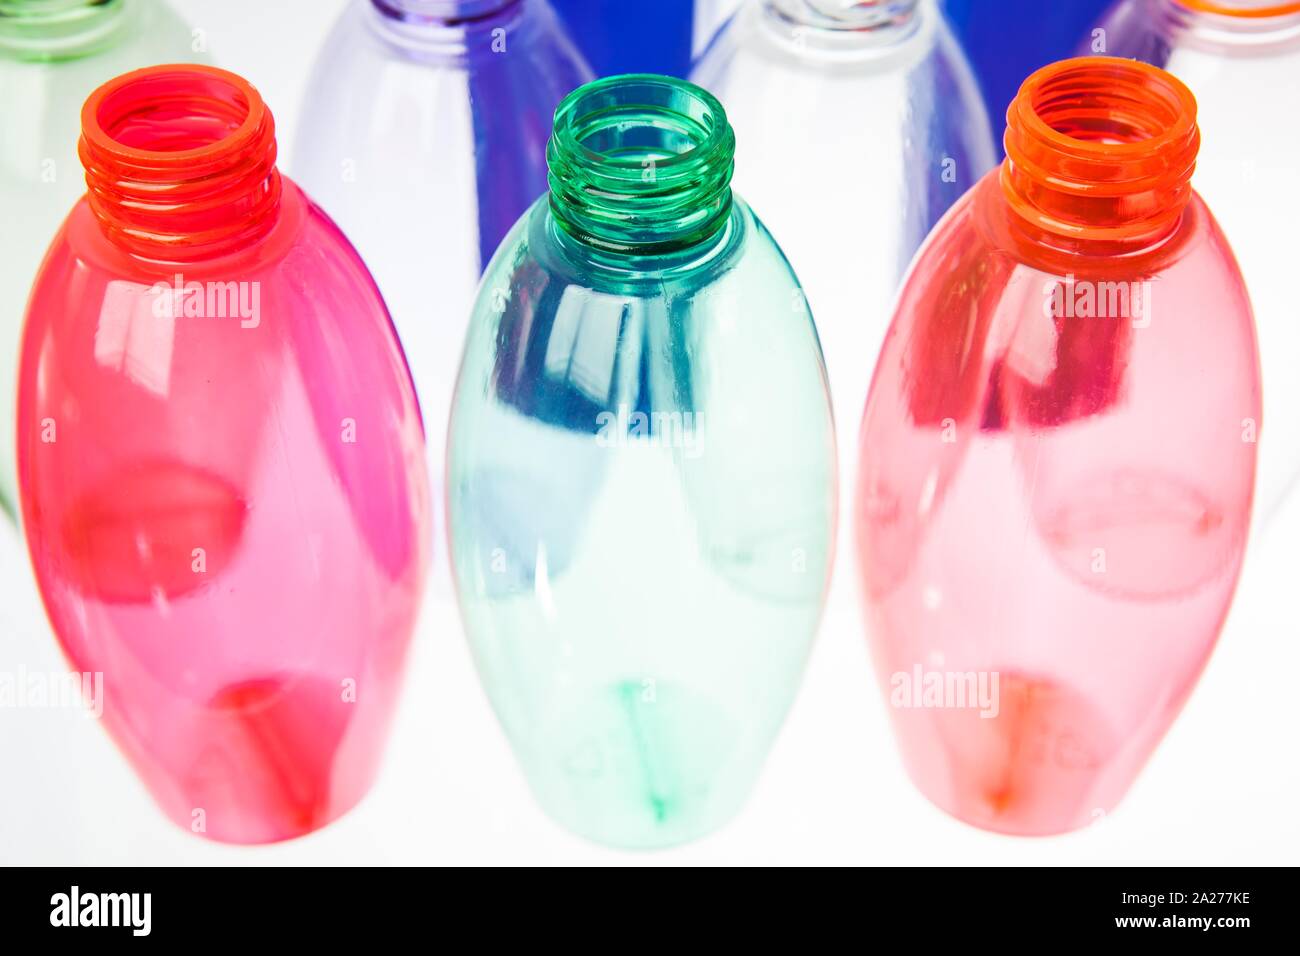 colored plastic bottles syde by syde on a translucent surface Stock Photo